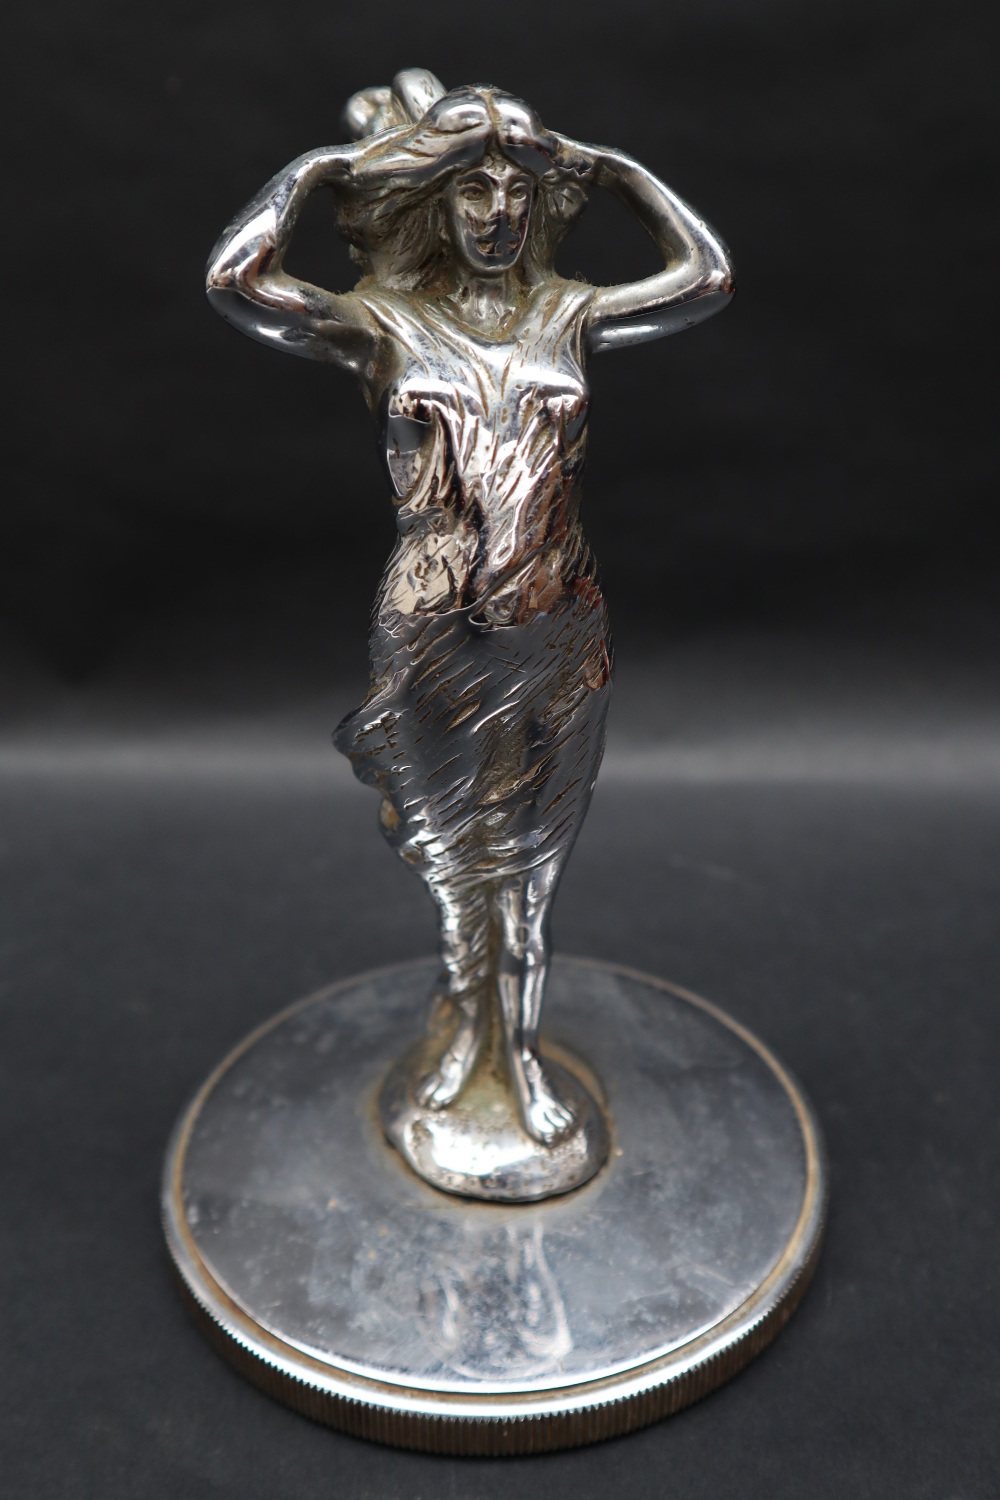 A chrome car / truck mascot of a maiden with flowing hair and arms raised, - Image 4 of 6